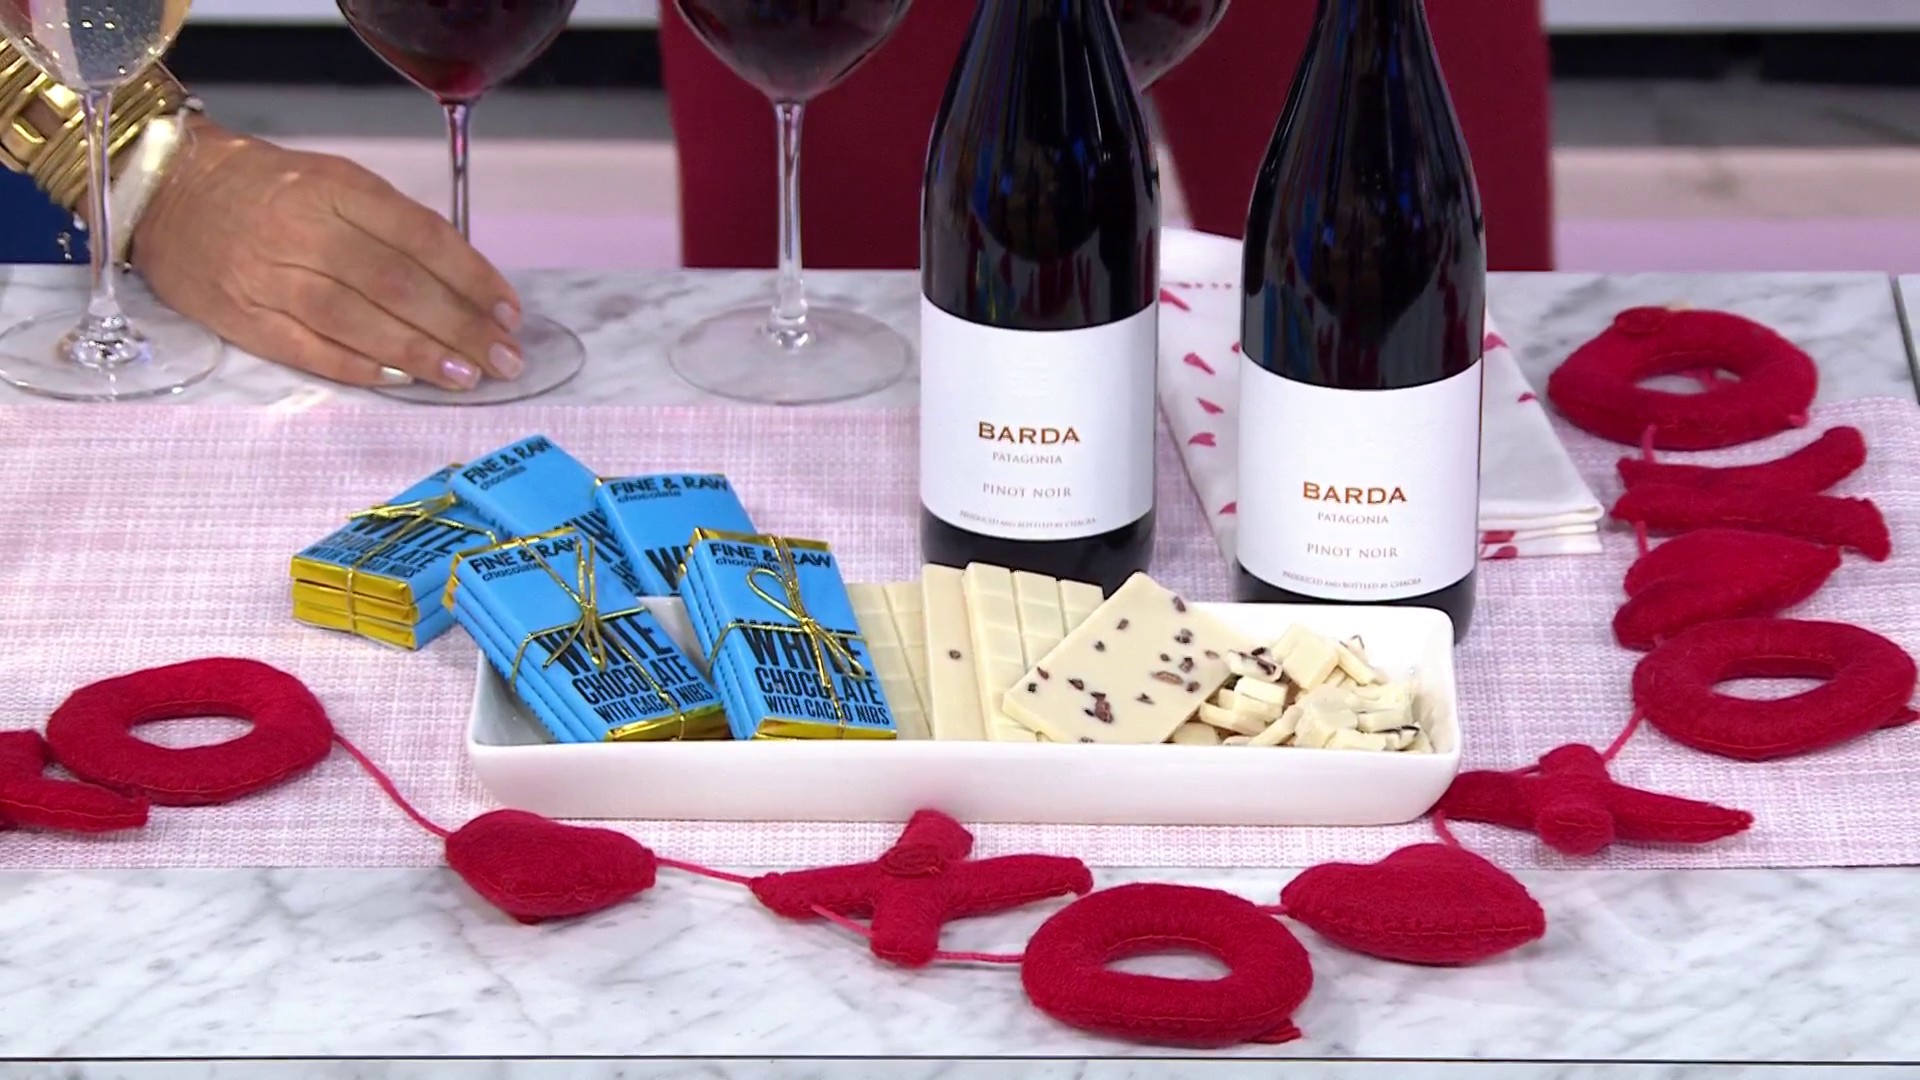 How to perfectly pair chocolate and wine for Valentine's Day